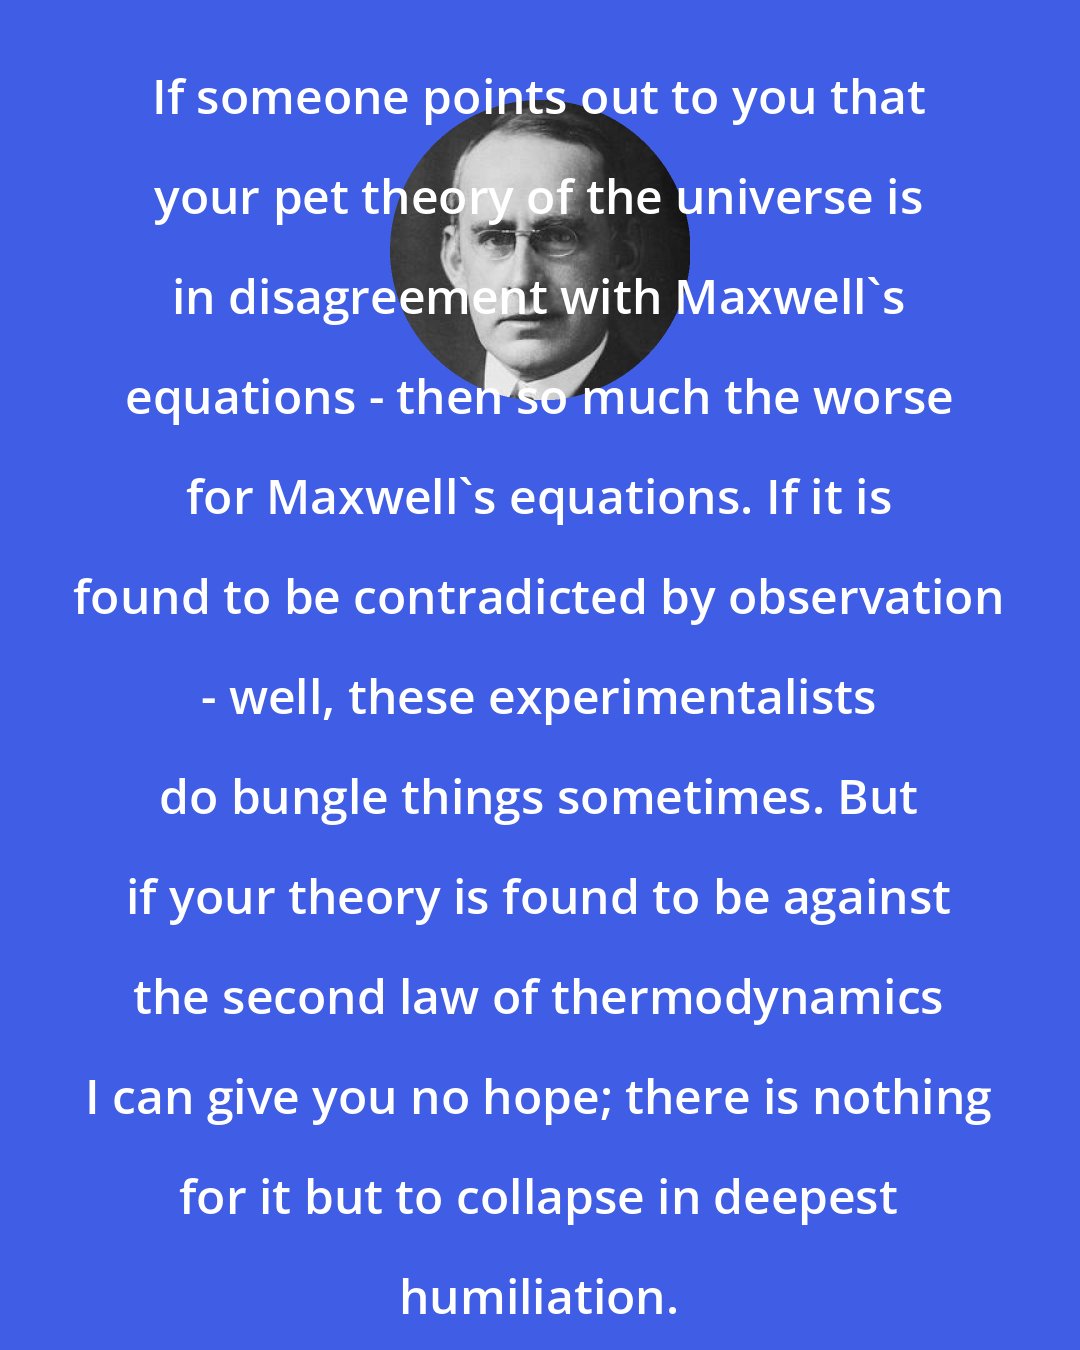 Arthur Eddington: If someone points out to you that your pet theory of the universe is in disagreement with Maxwell's equations - then so much the worse for Maxwell's equations. If it is found to be contradicted by observation - well, these experimentalists do bungle things sometimes. But if your theory is found to be against the second law of thermodynamics I can give you no hope; there is nothing for it but to collapse in deepest humiliation.